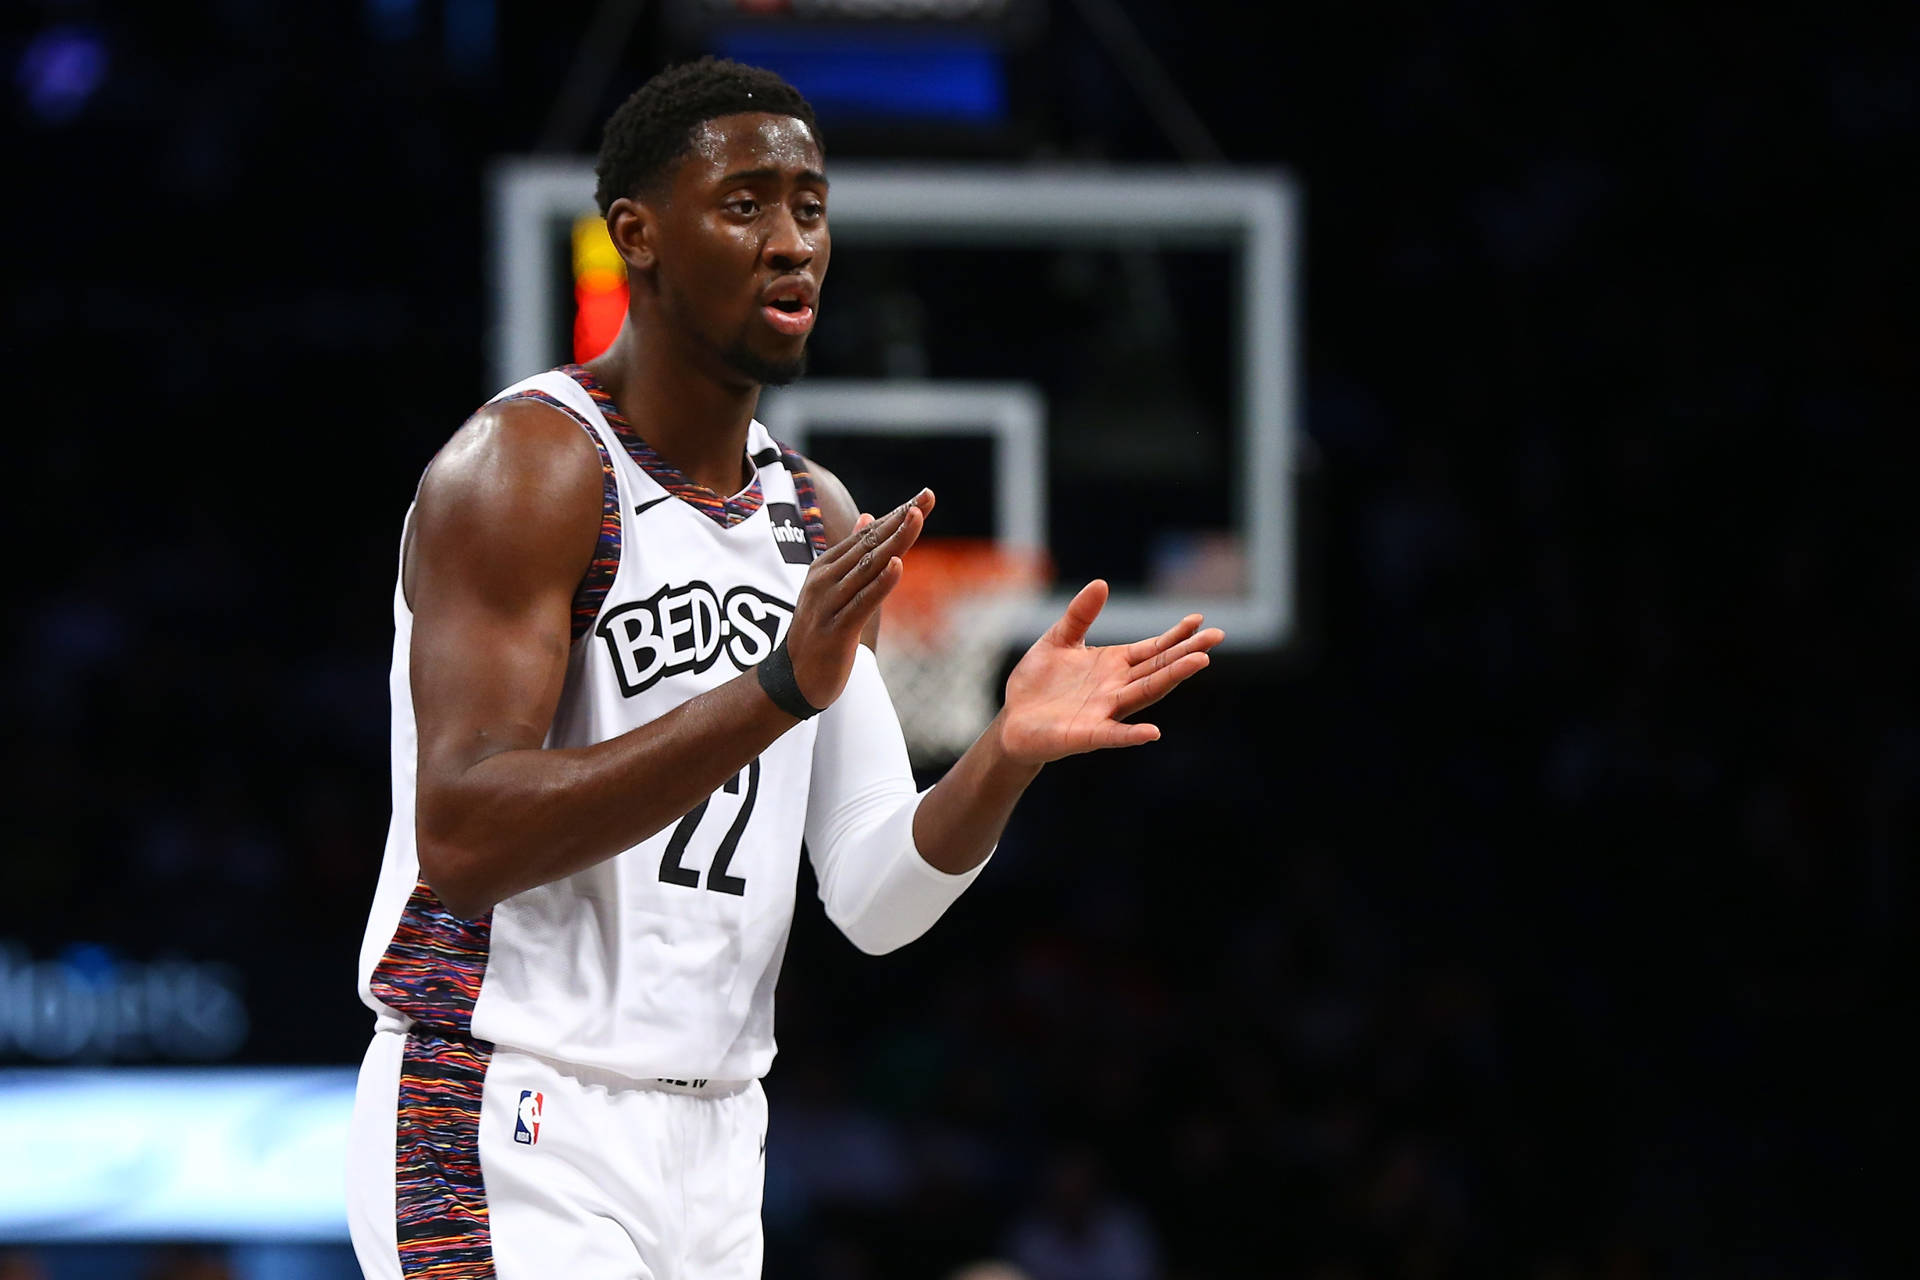 Caris LeVert energetically clapping on the basketball court Wallpaper